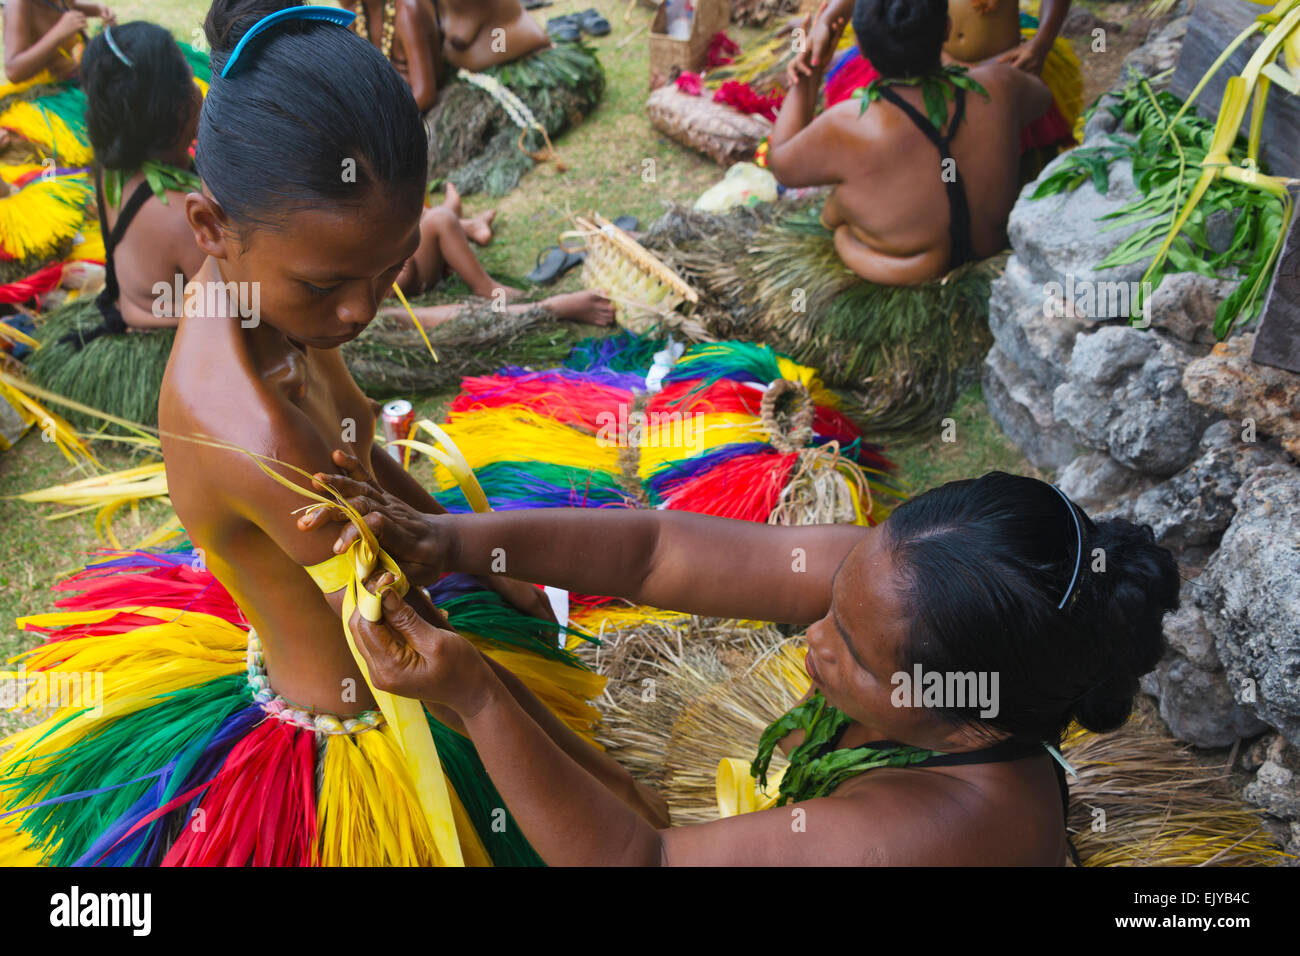 Download this stock image: Yapese people preparing at Yap Day Festival, Yap...